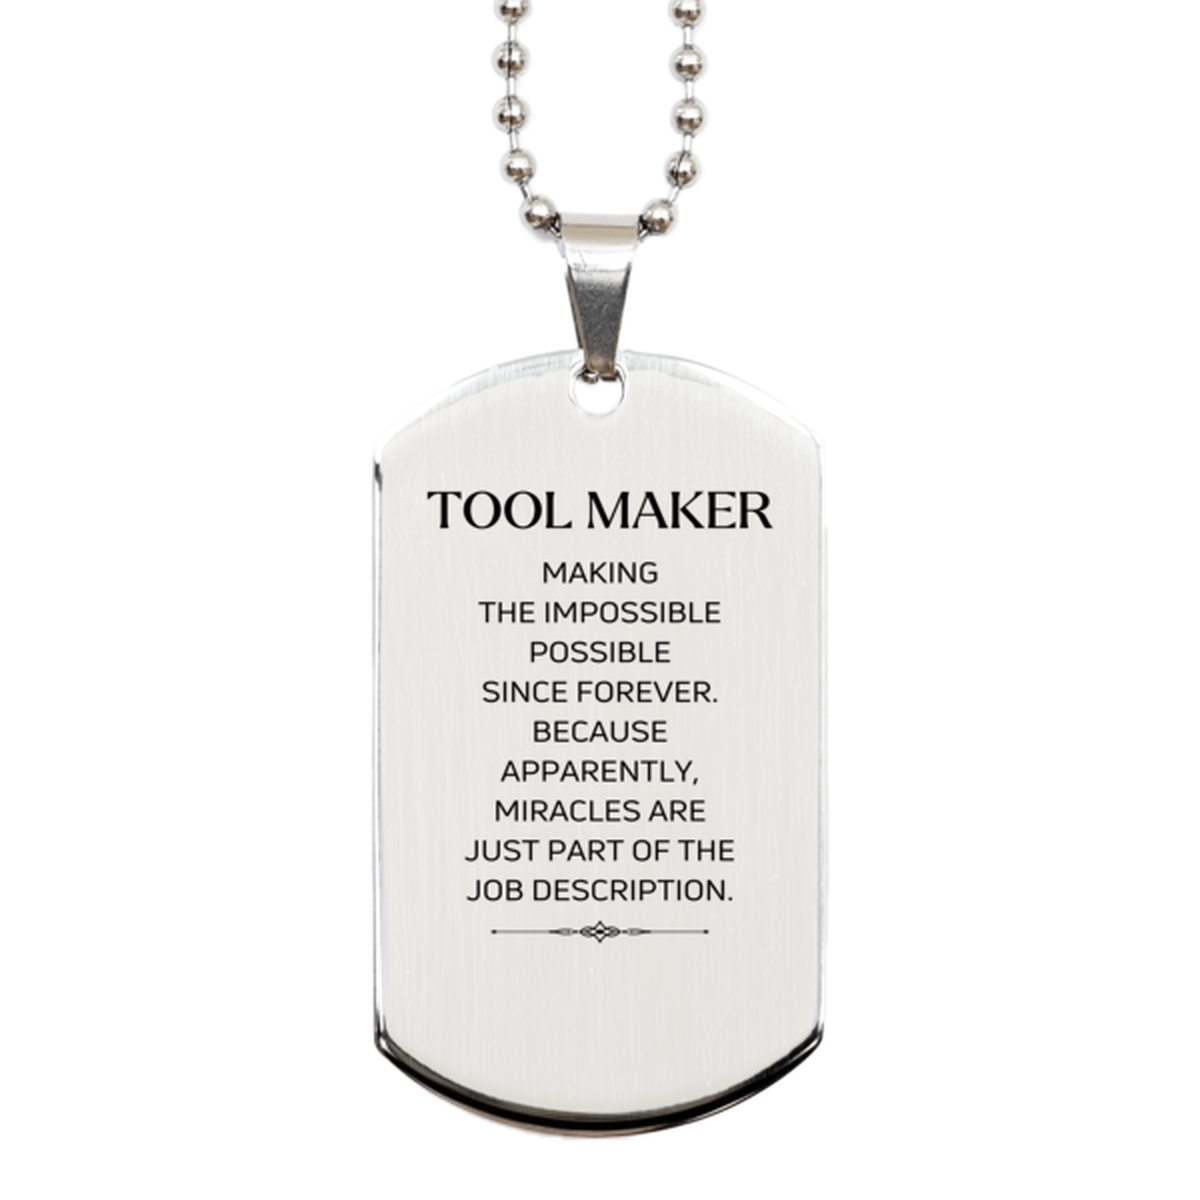 Funny Tool Maker Gifts, Miracles are just part of the job description, Inspirational Birthday Silver Dog Tag For Tool Maker, Men, Women, Coworkers, Friends, Boss